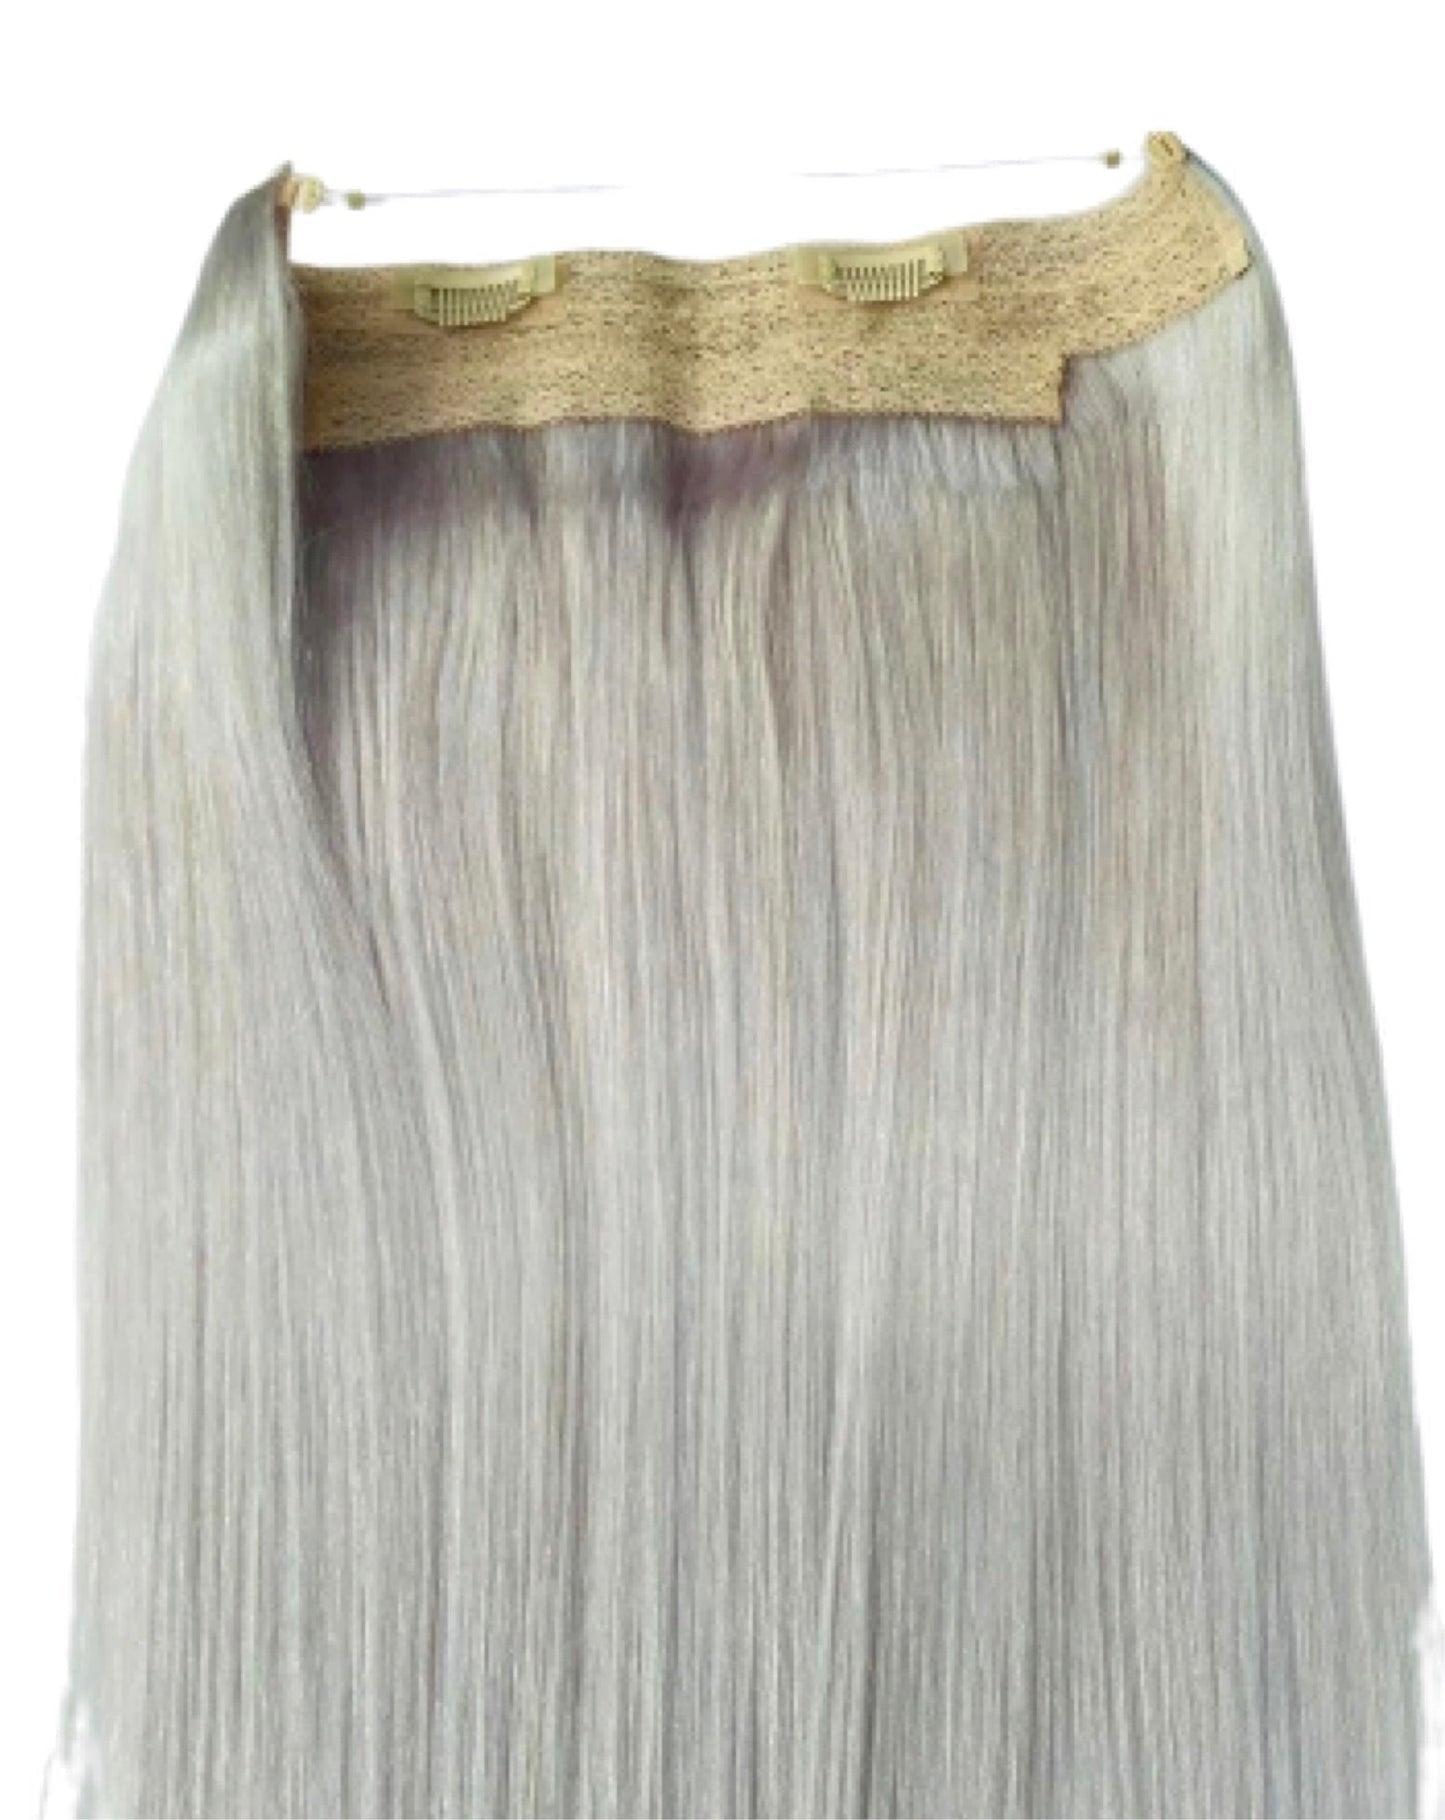 RETAIL HALO EXTENSIONS - NATURAL - WARM BLONDE